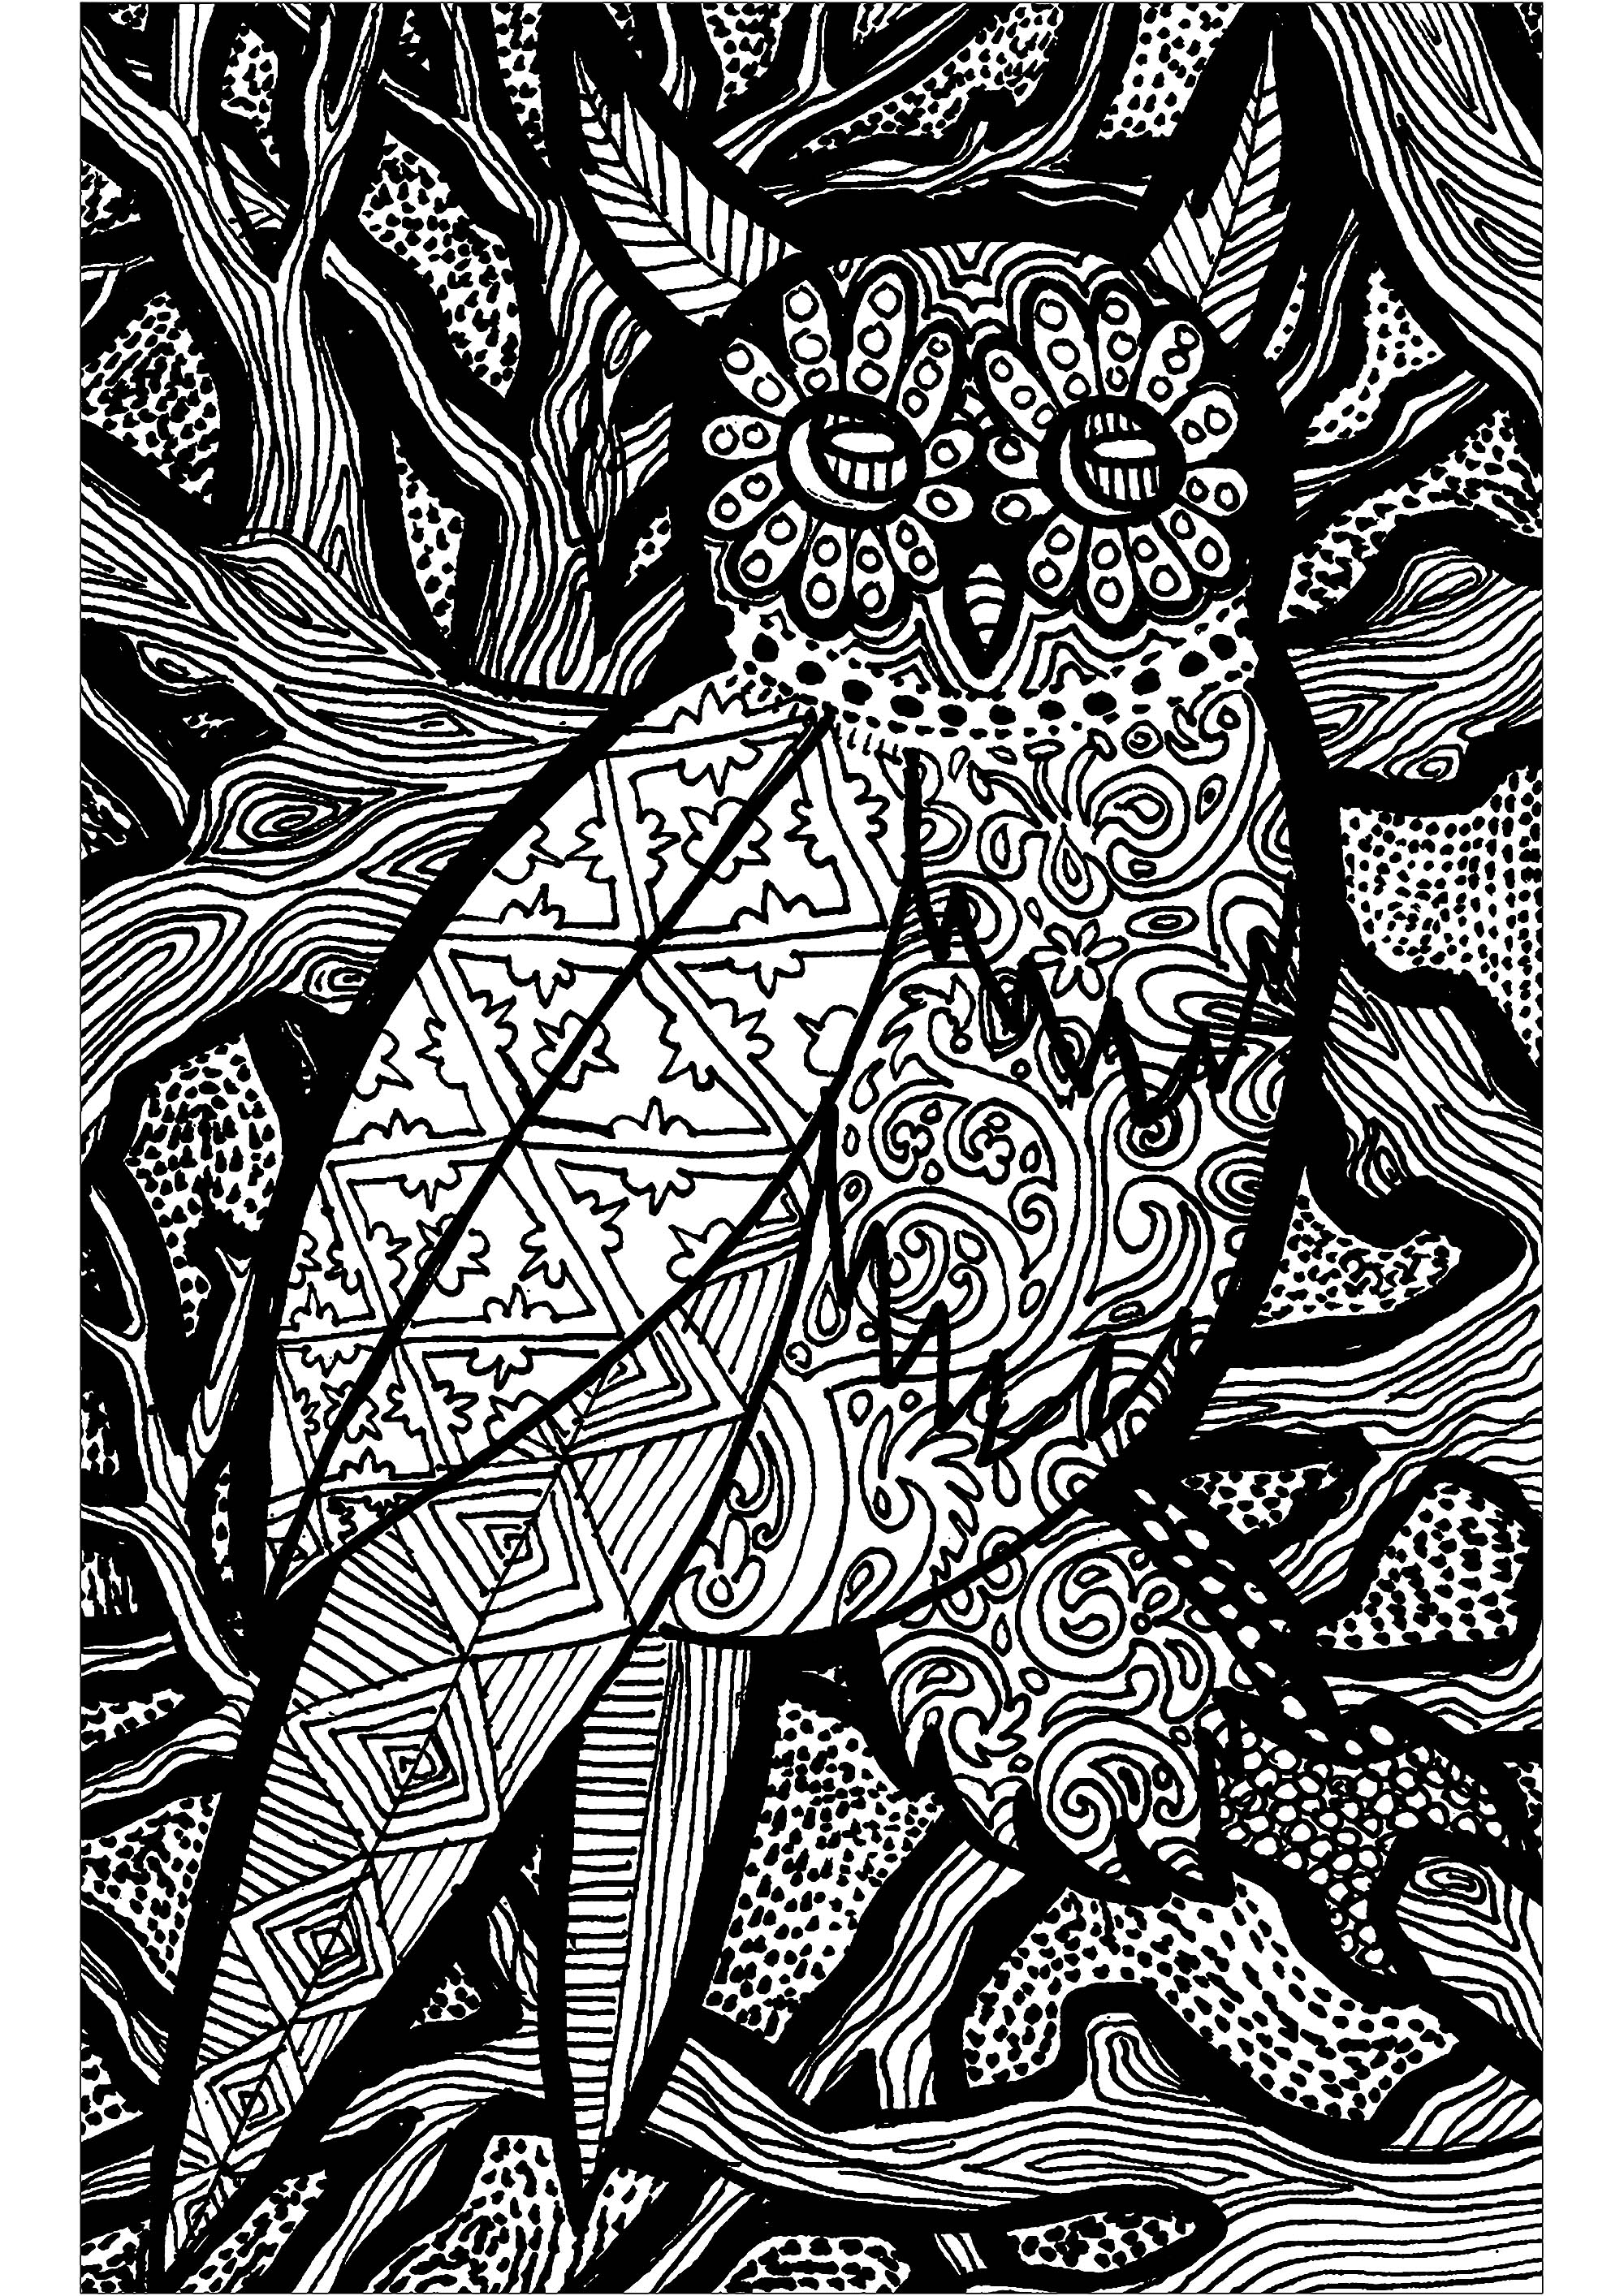 Look at this beautiful owl in its Zentangle forest !, Artist : HGCreative. Arts